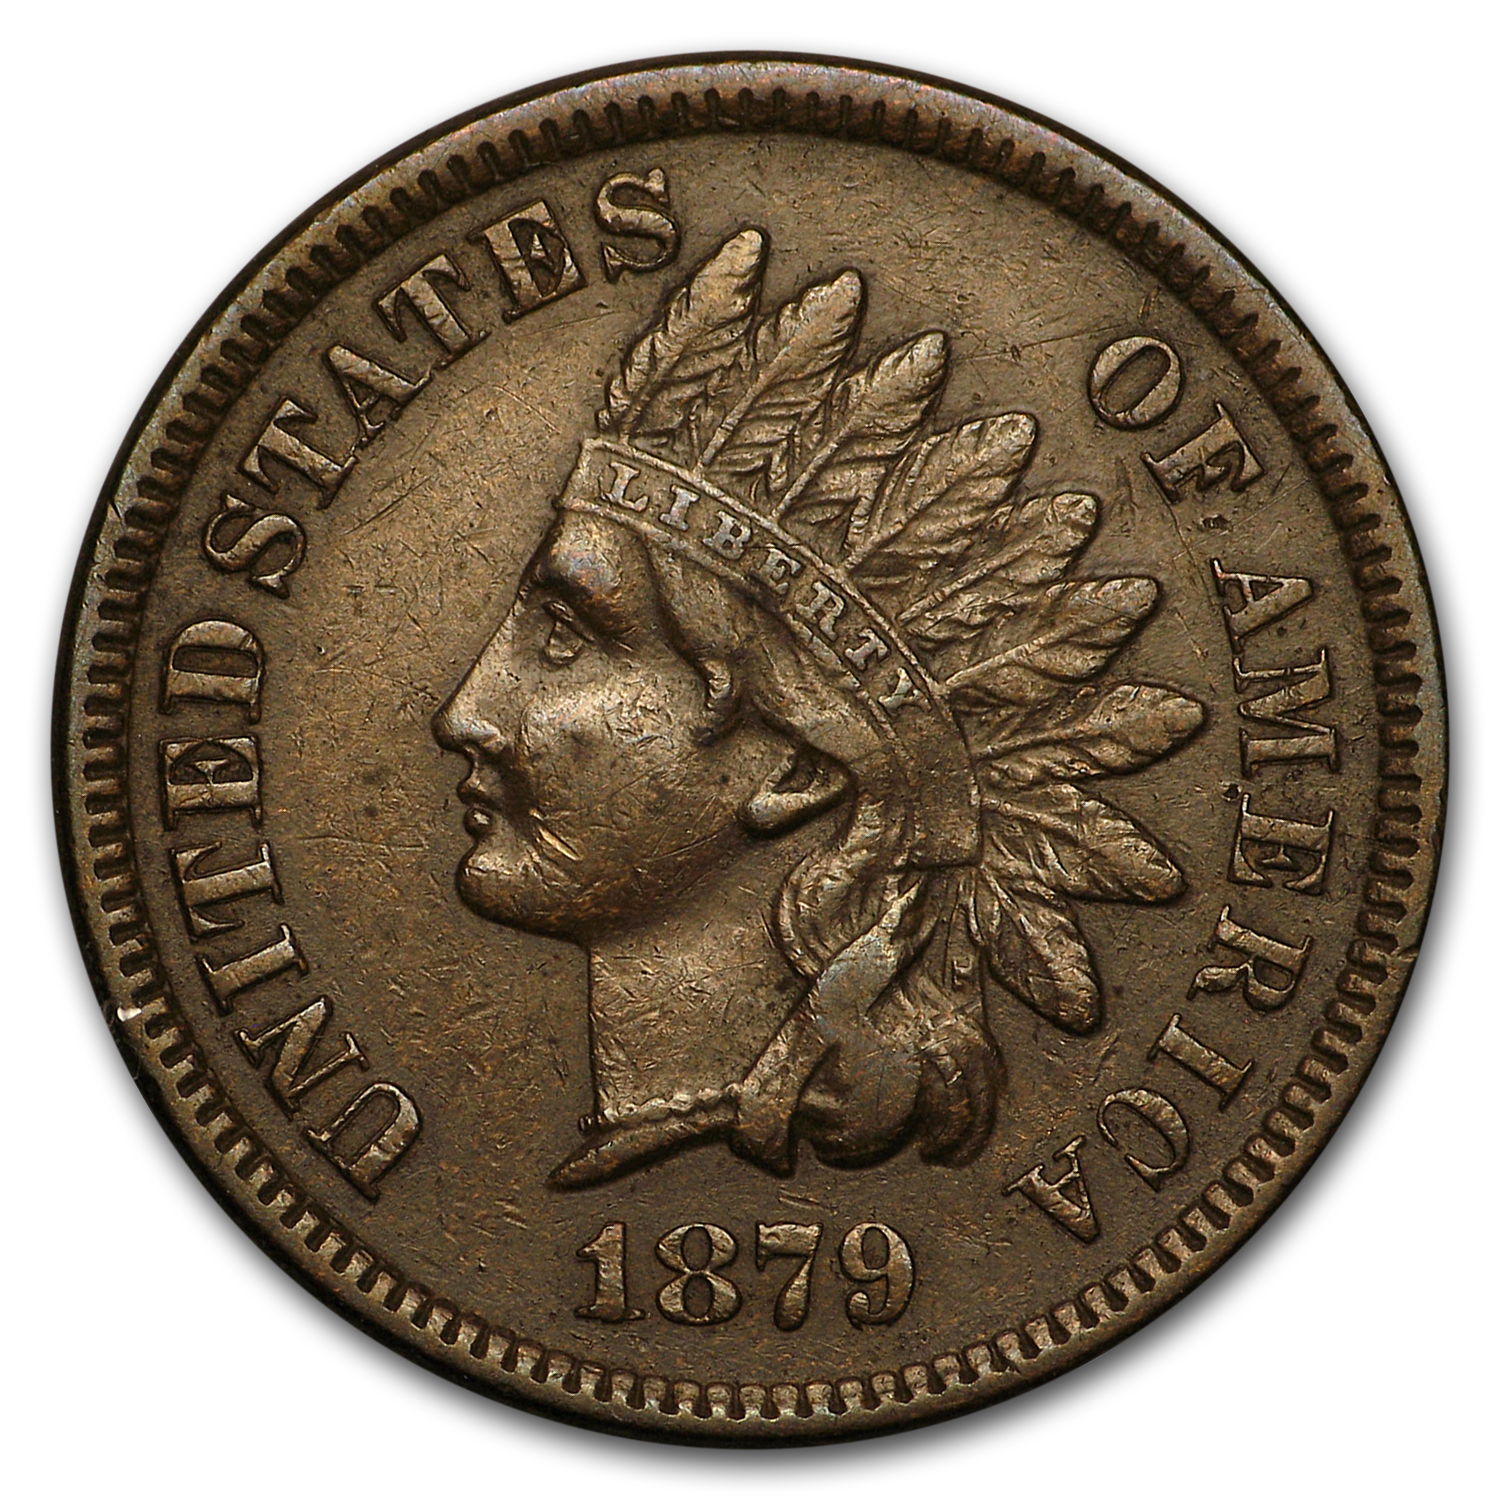 Buy 1879 Indian Head Cent XF